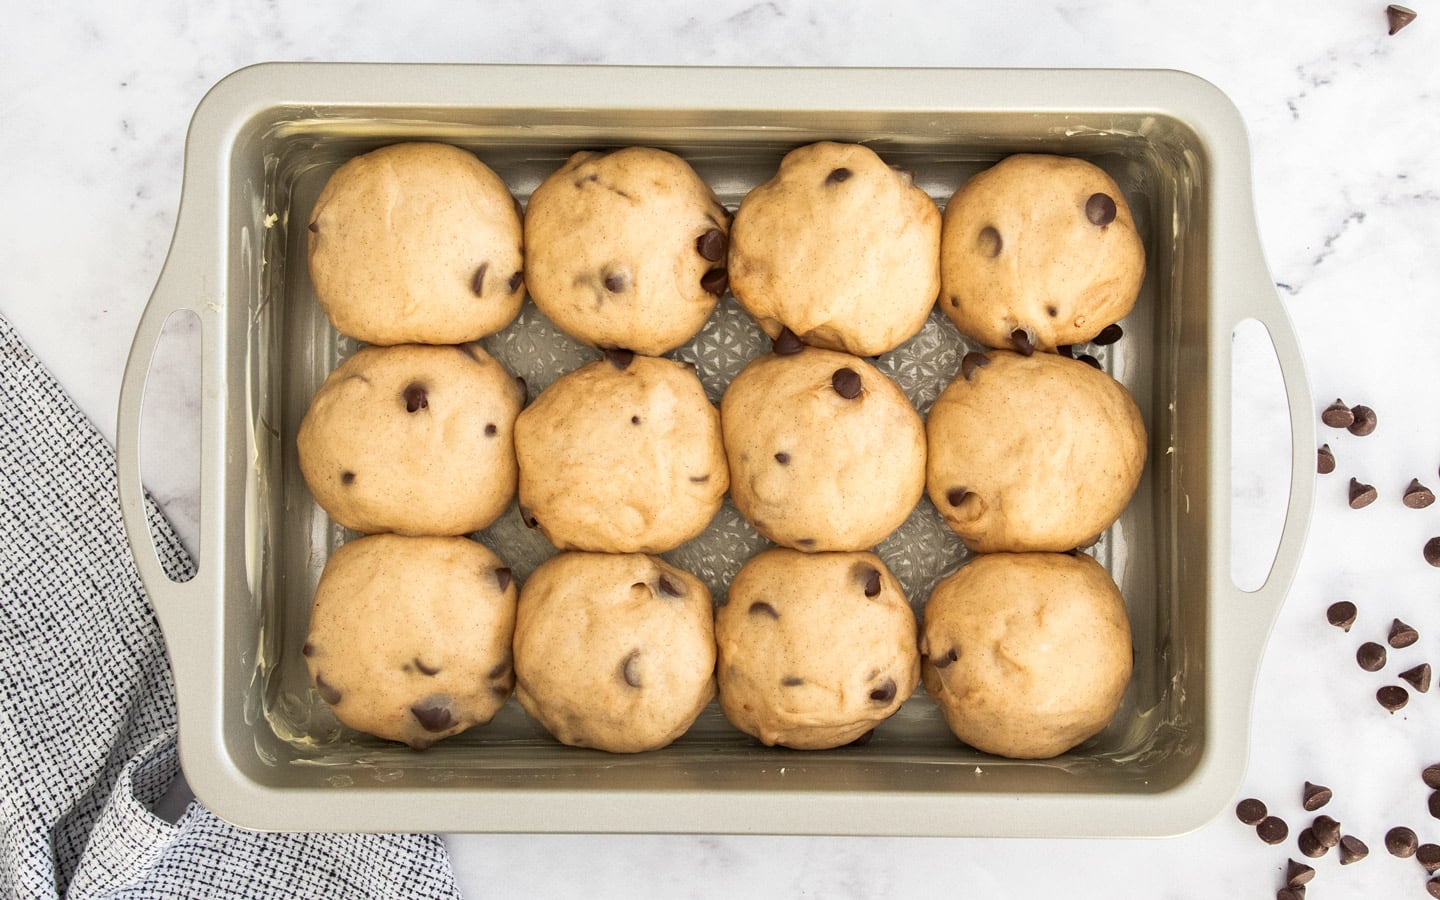 12 buns that have risen in a pan.